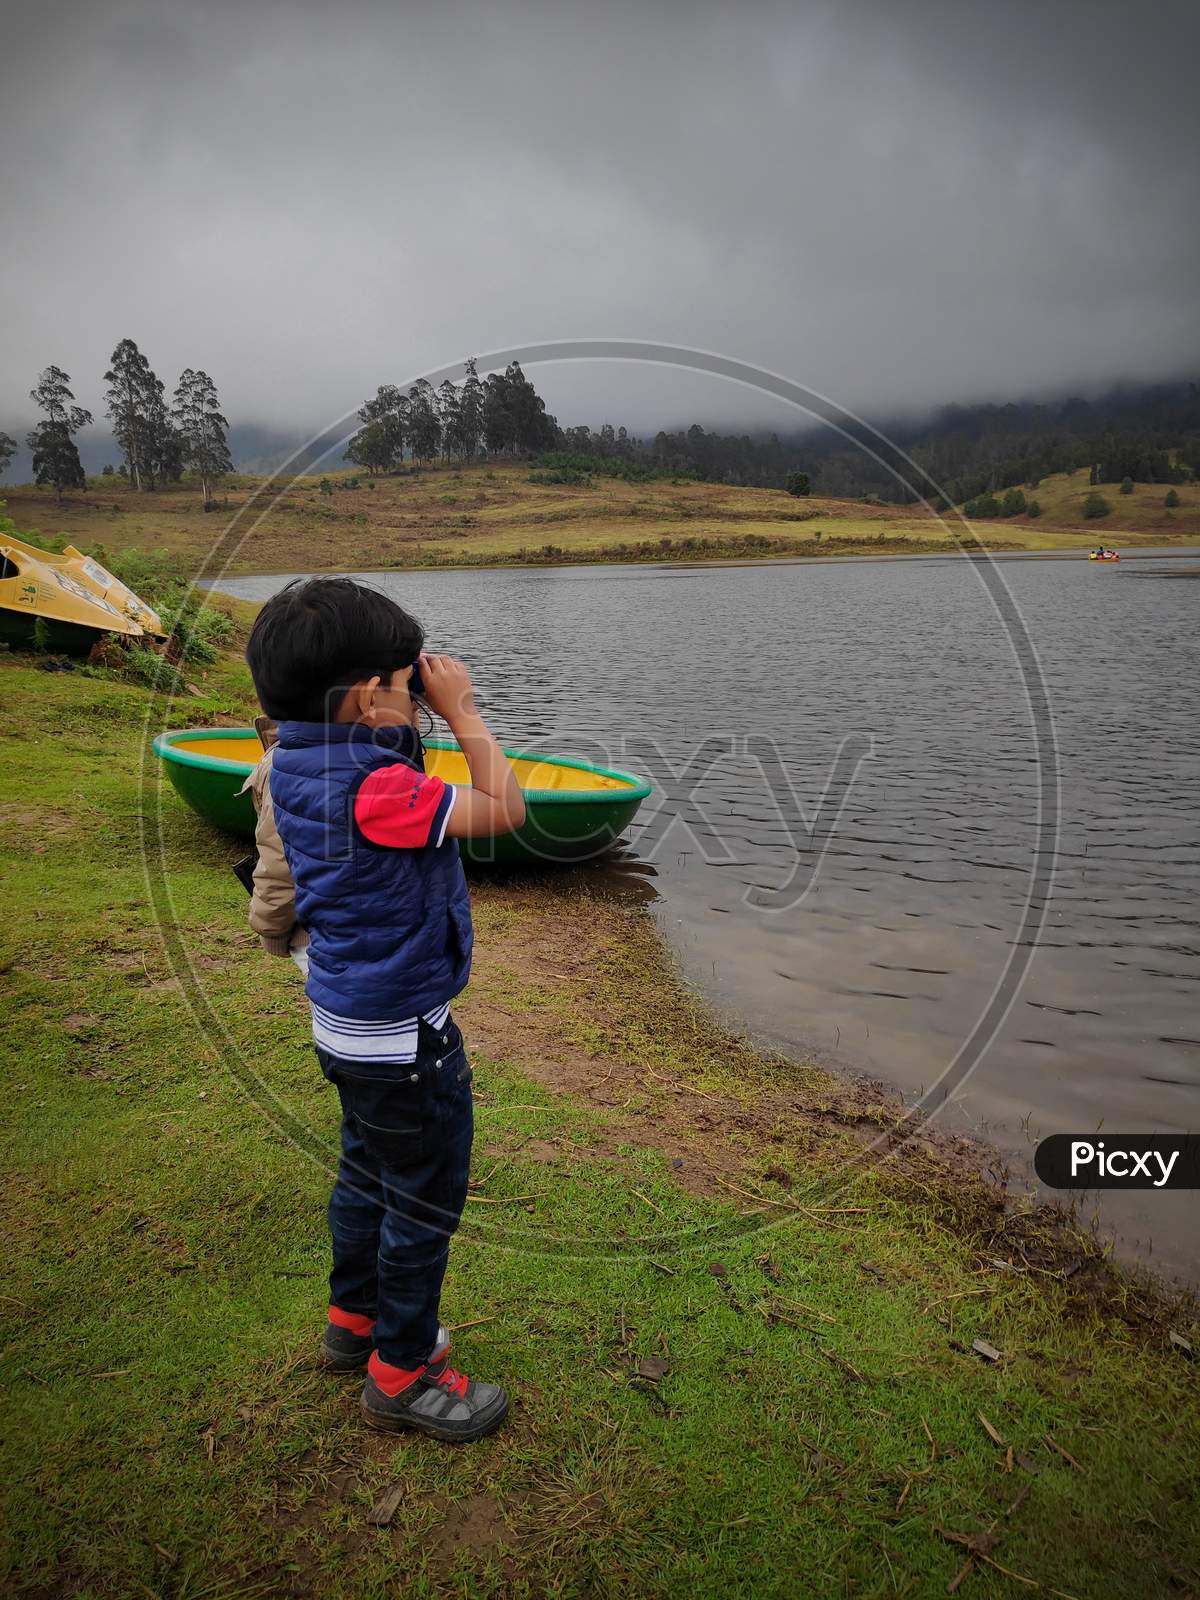 Boy Or Kid Or Chidren Standing On Shore Of Lake On Green Fileds Watching Beauty Of Lake And Boating In Kodaikanal,India. Tourism And Travel Concept Image, Fresh And Relax Type Nature Image